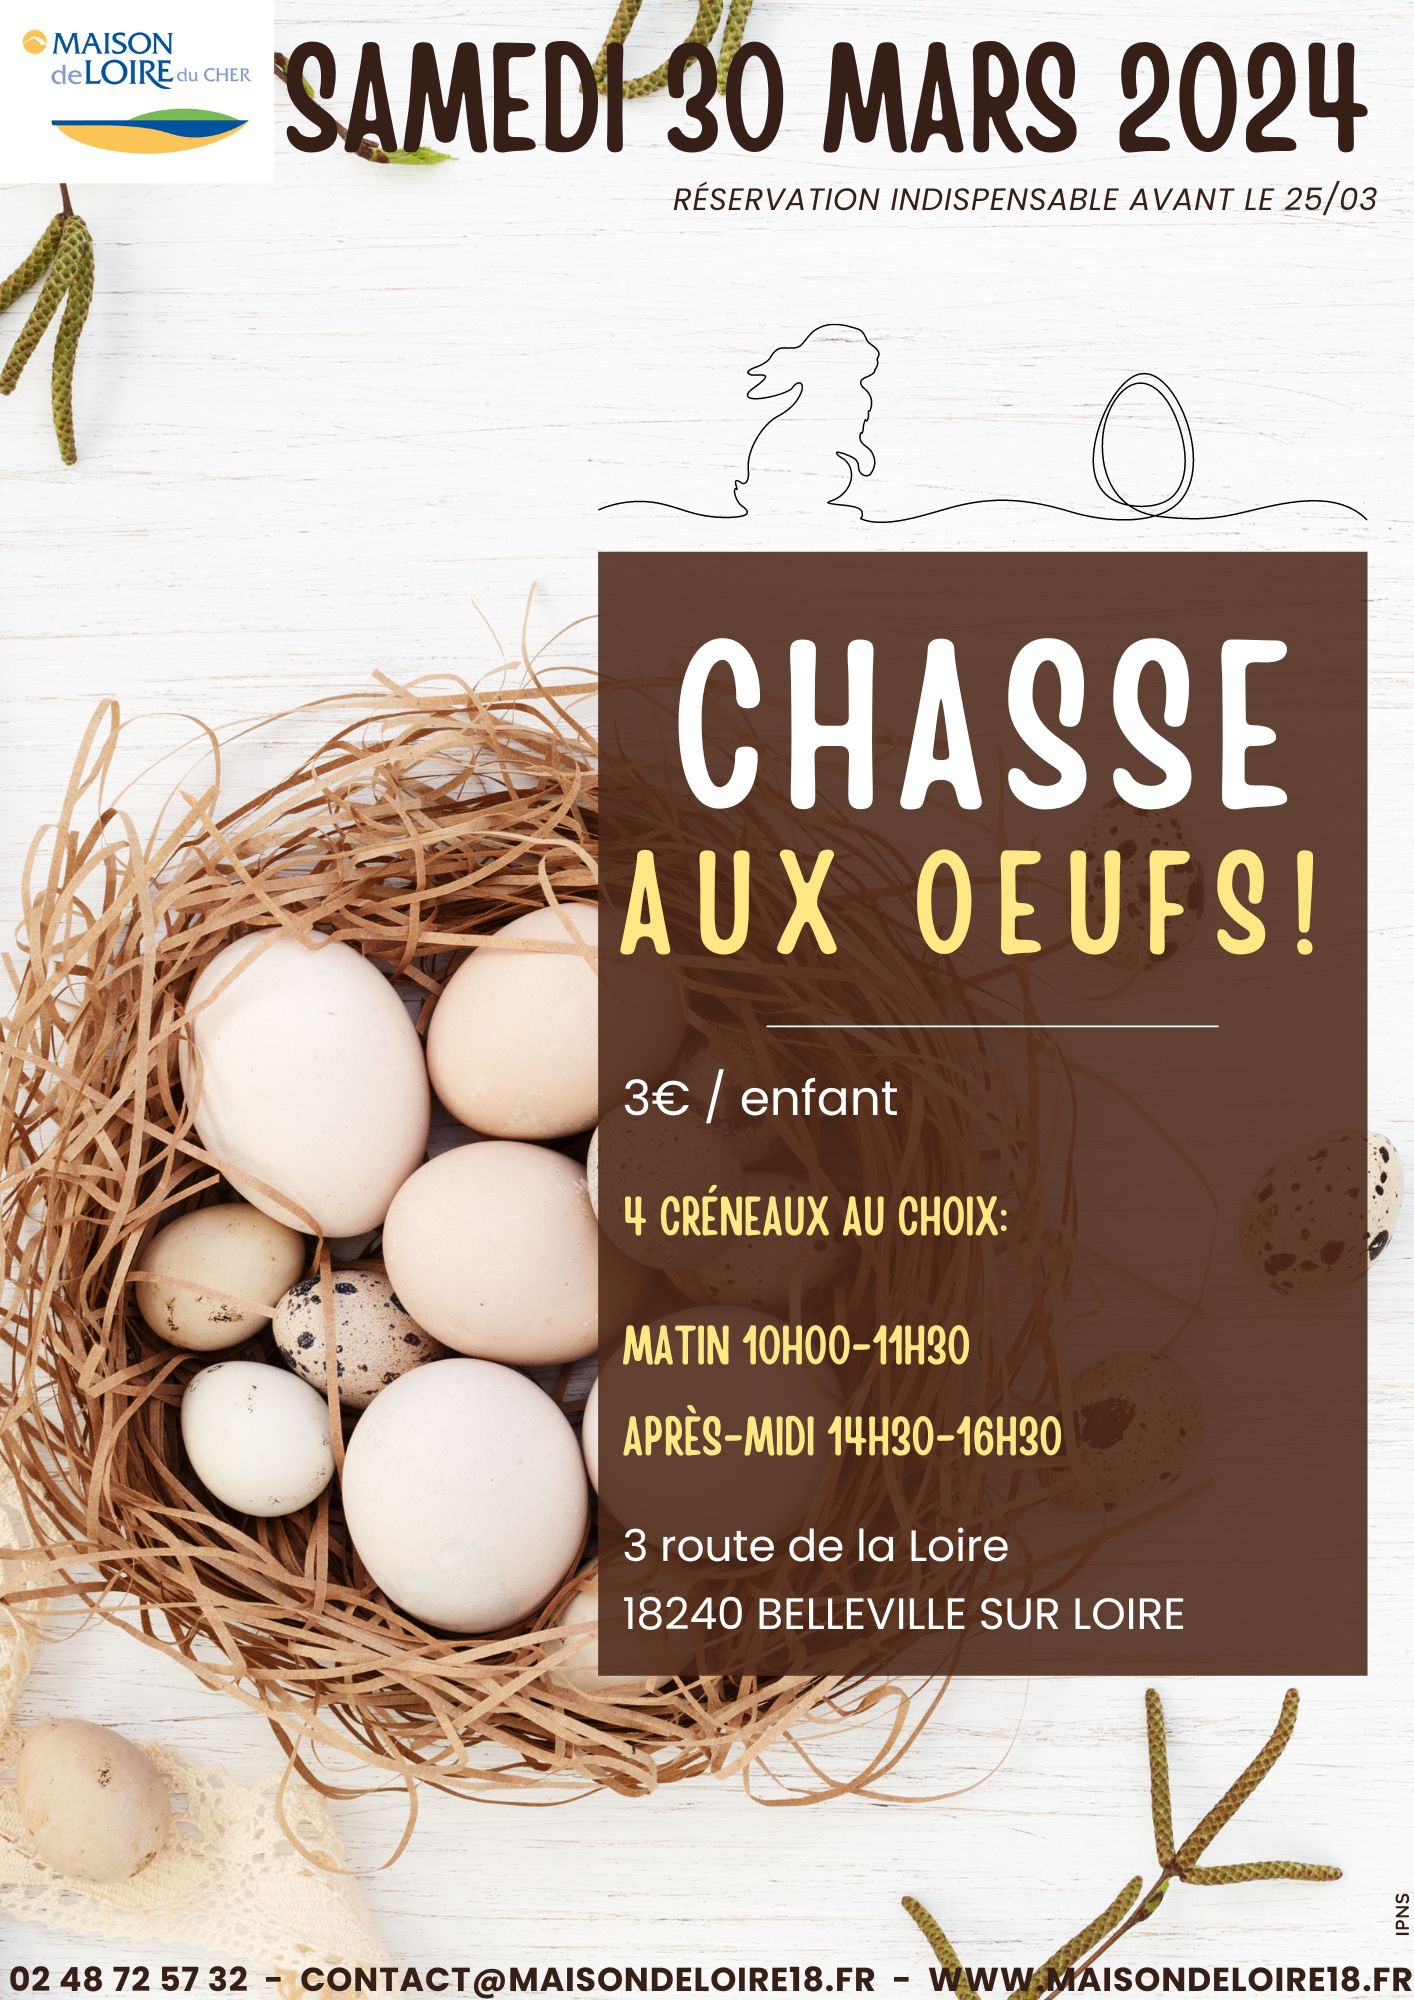 Chasse aux oeufs de Pâques / Chasse aux yeux d'Halloween! null France null null null null